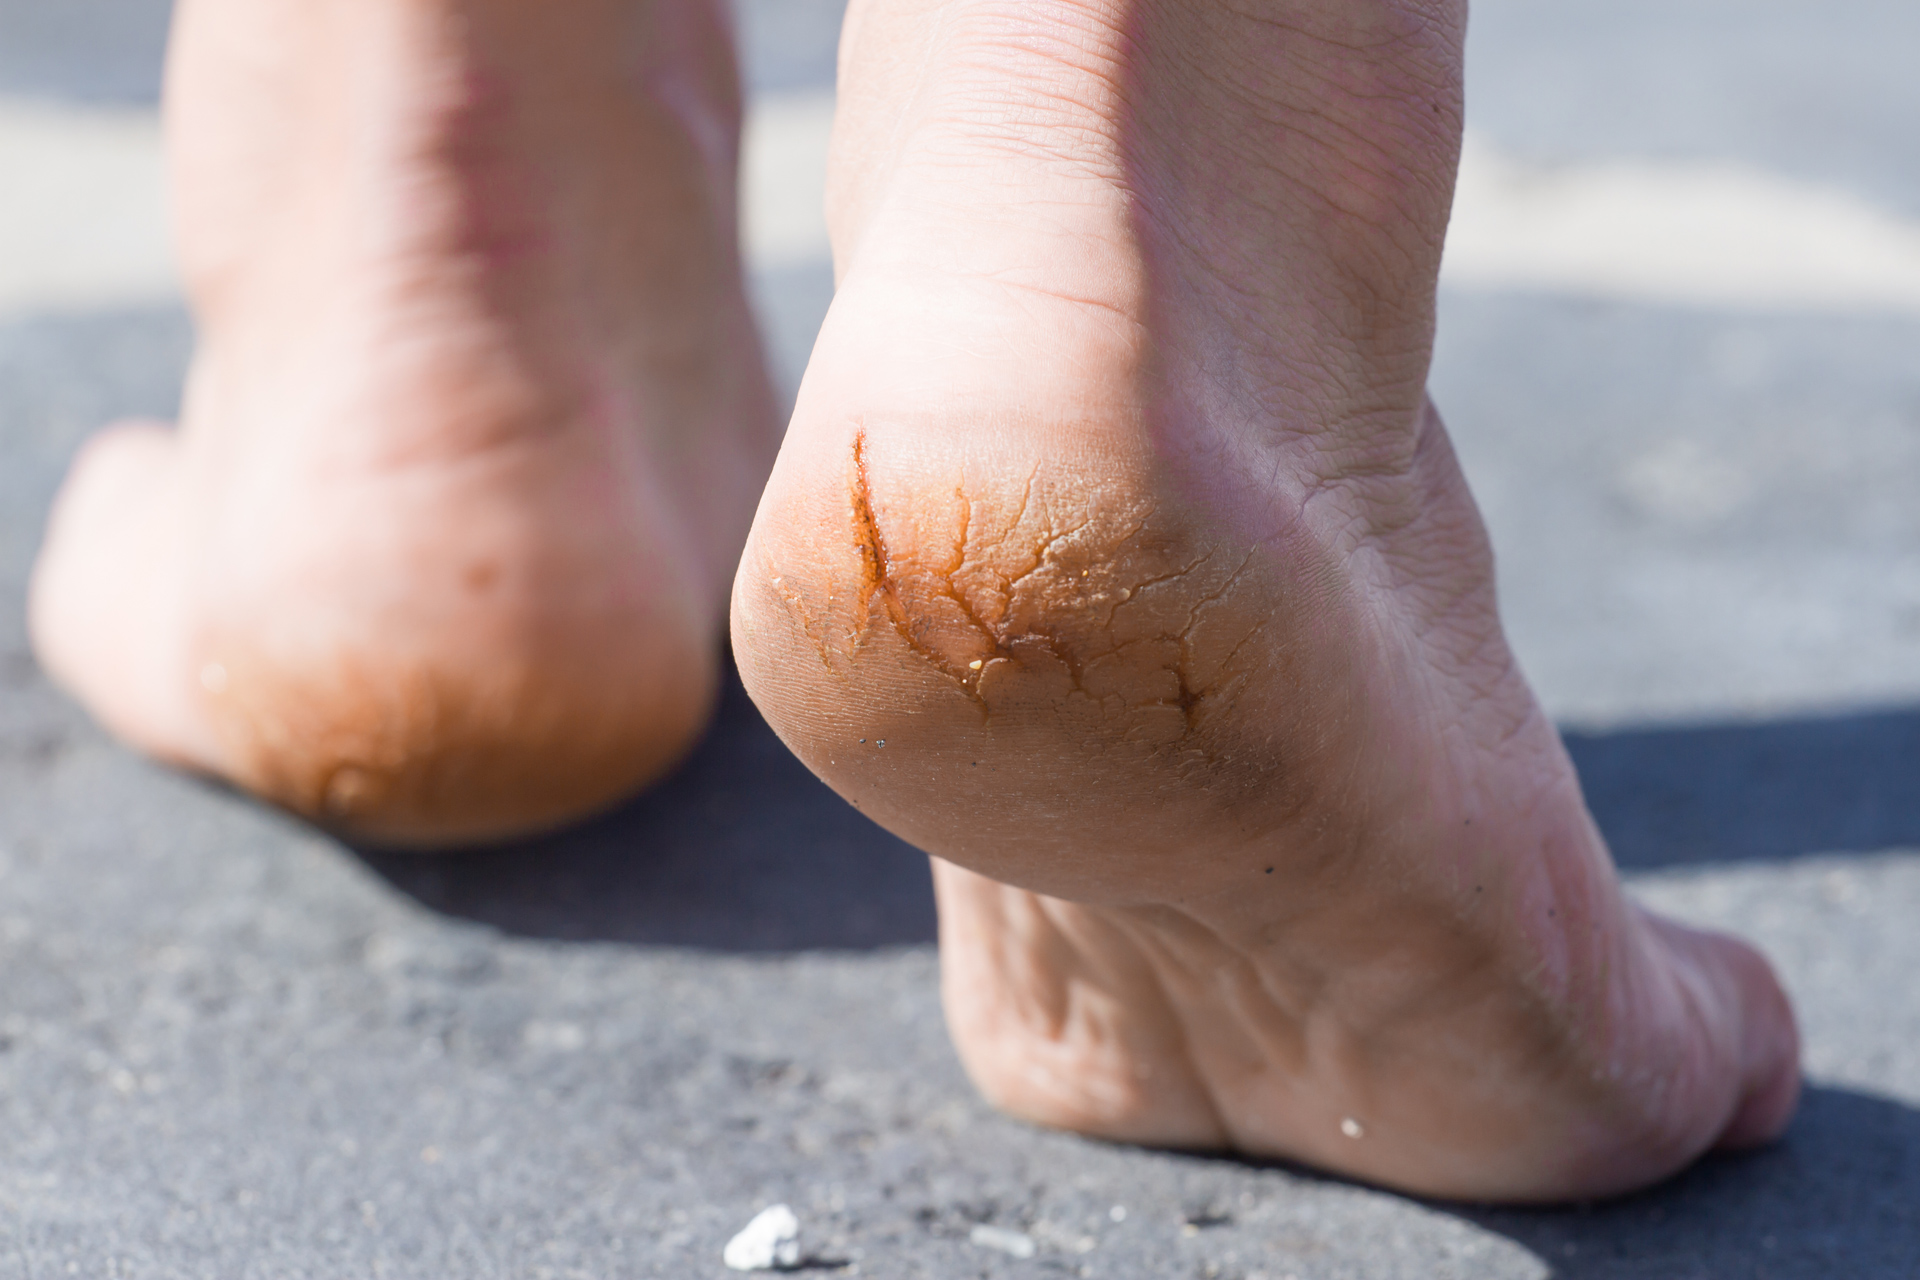 Podiatry First Bondi Junction - Dry cracked heels are a common foot dilemma  that can often lead to tenderness and become a source of discomfit. If left  untreated, the cracks will develop